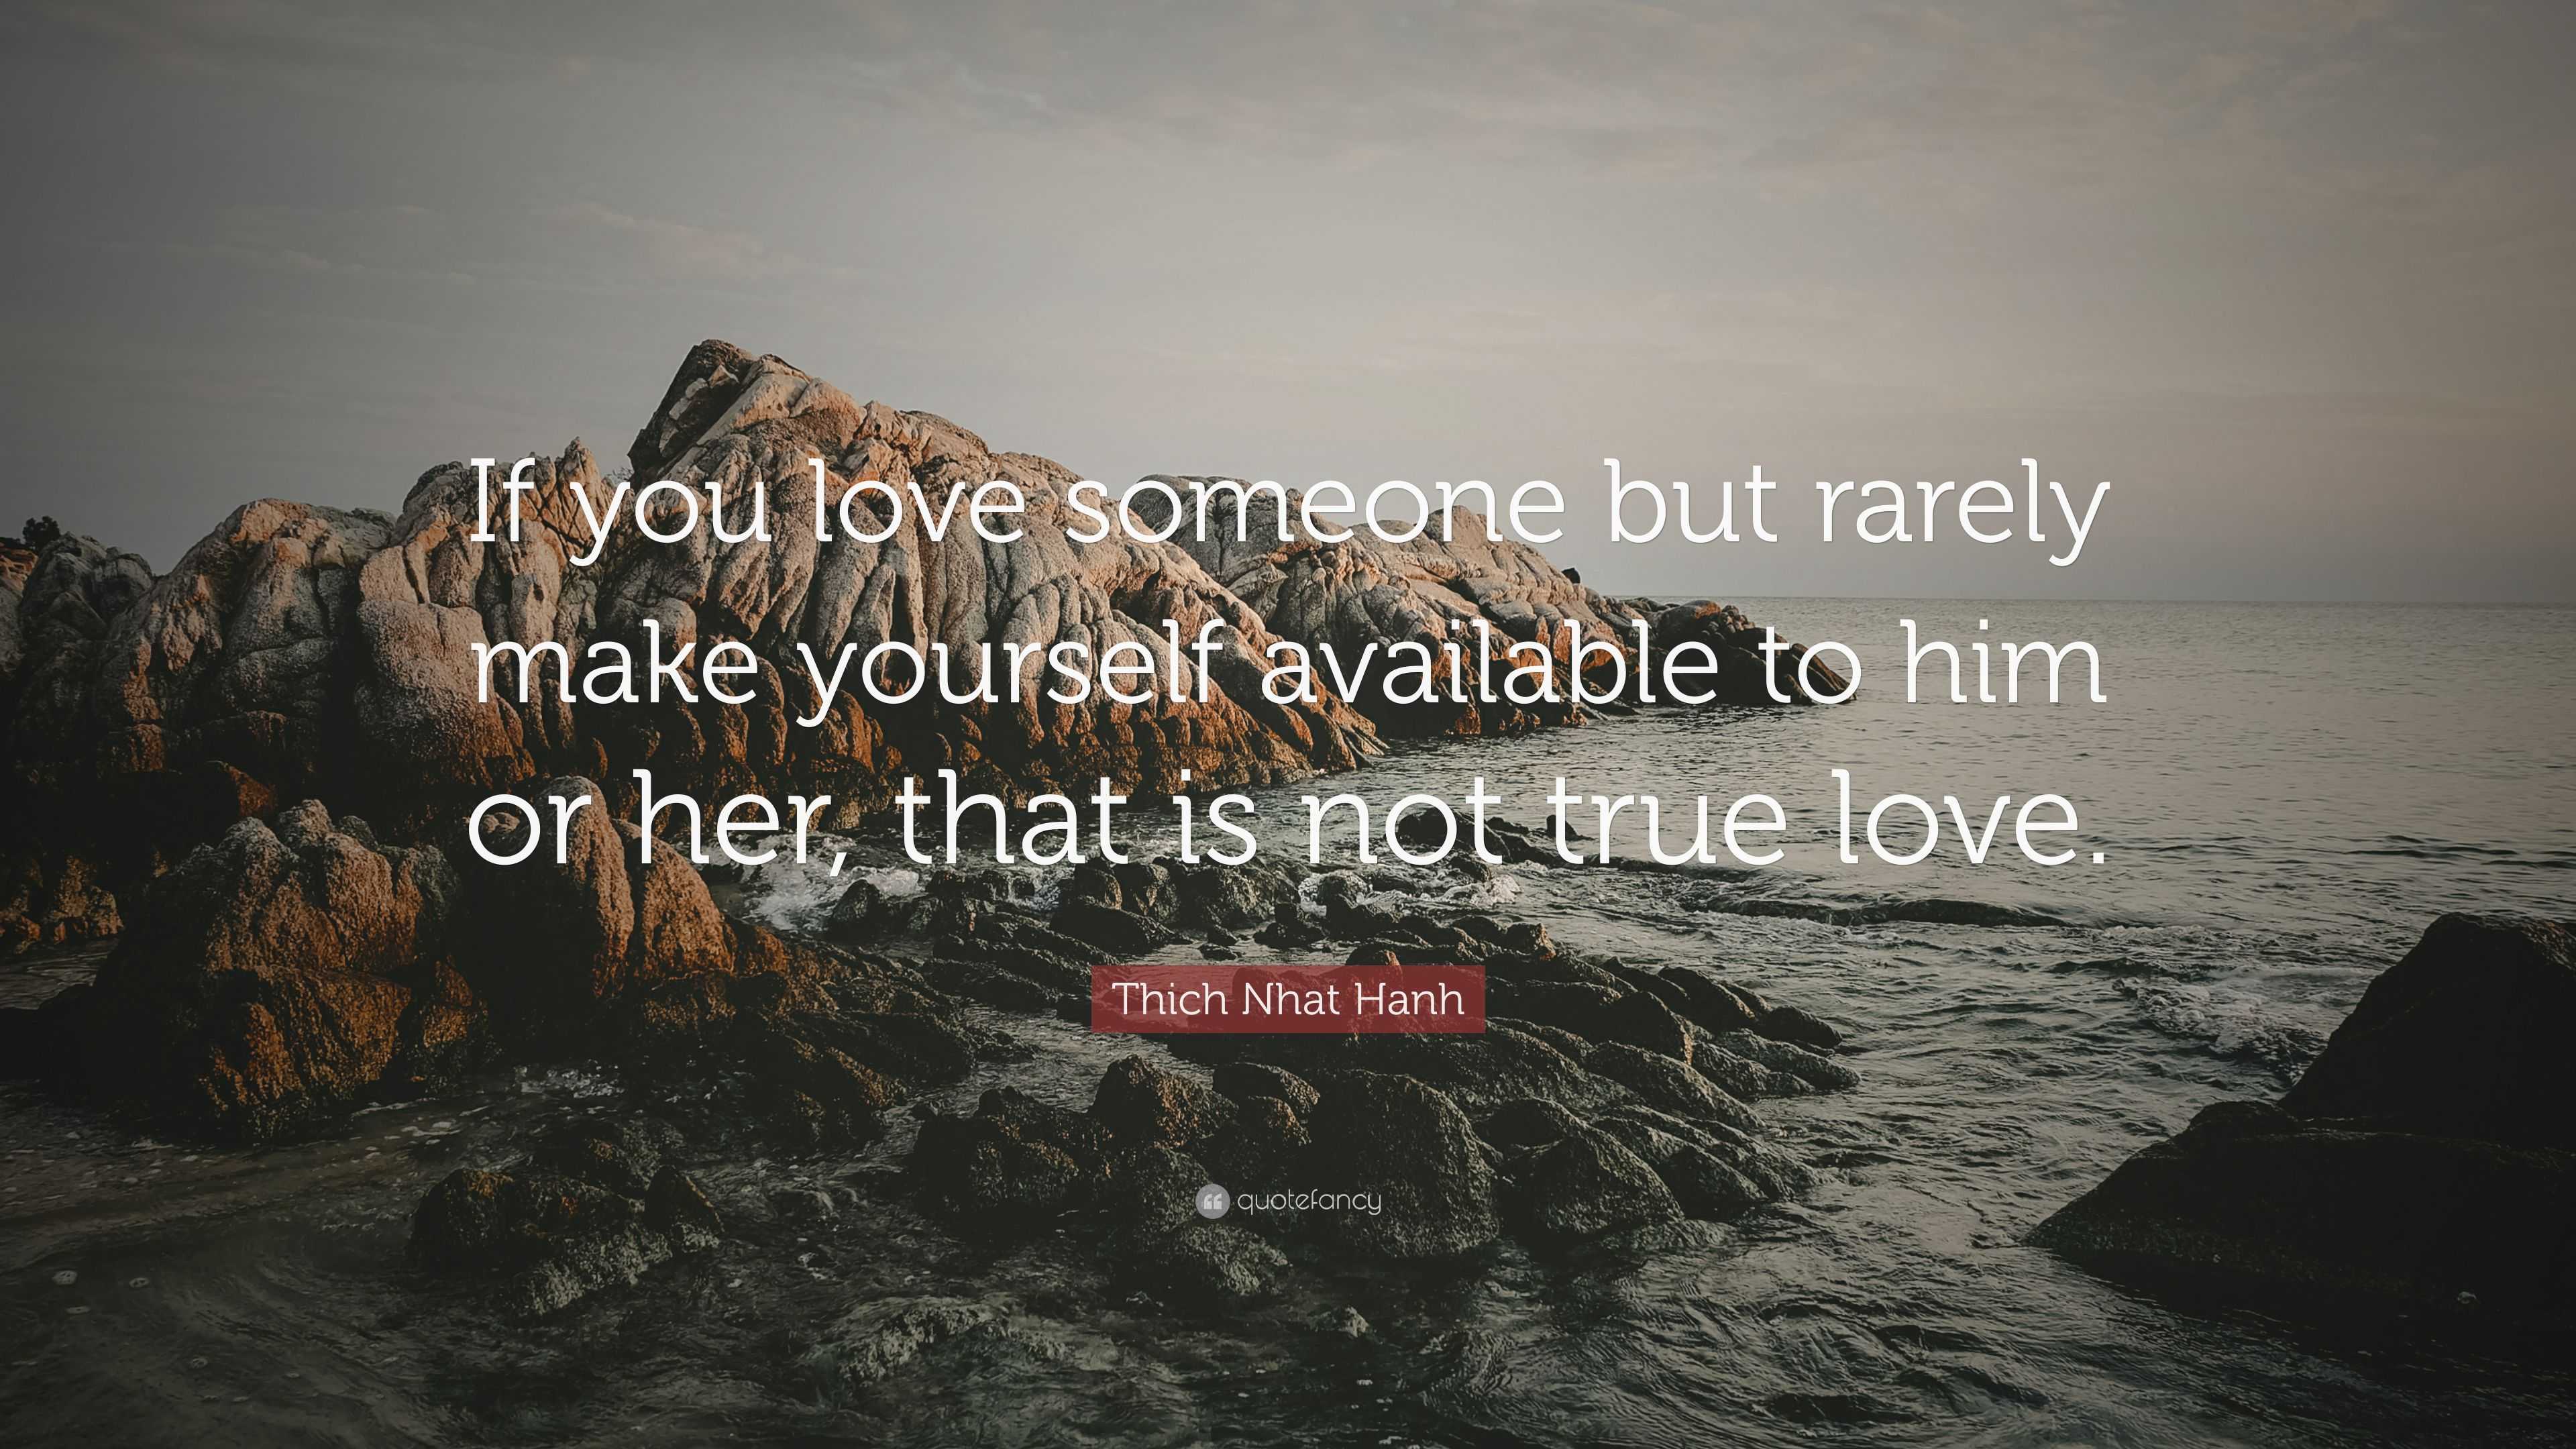 Thich Nhat Hanh Quote: “If you love someone but rarely make yourself ...